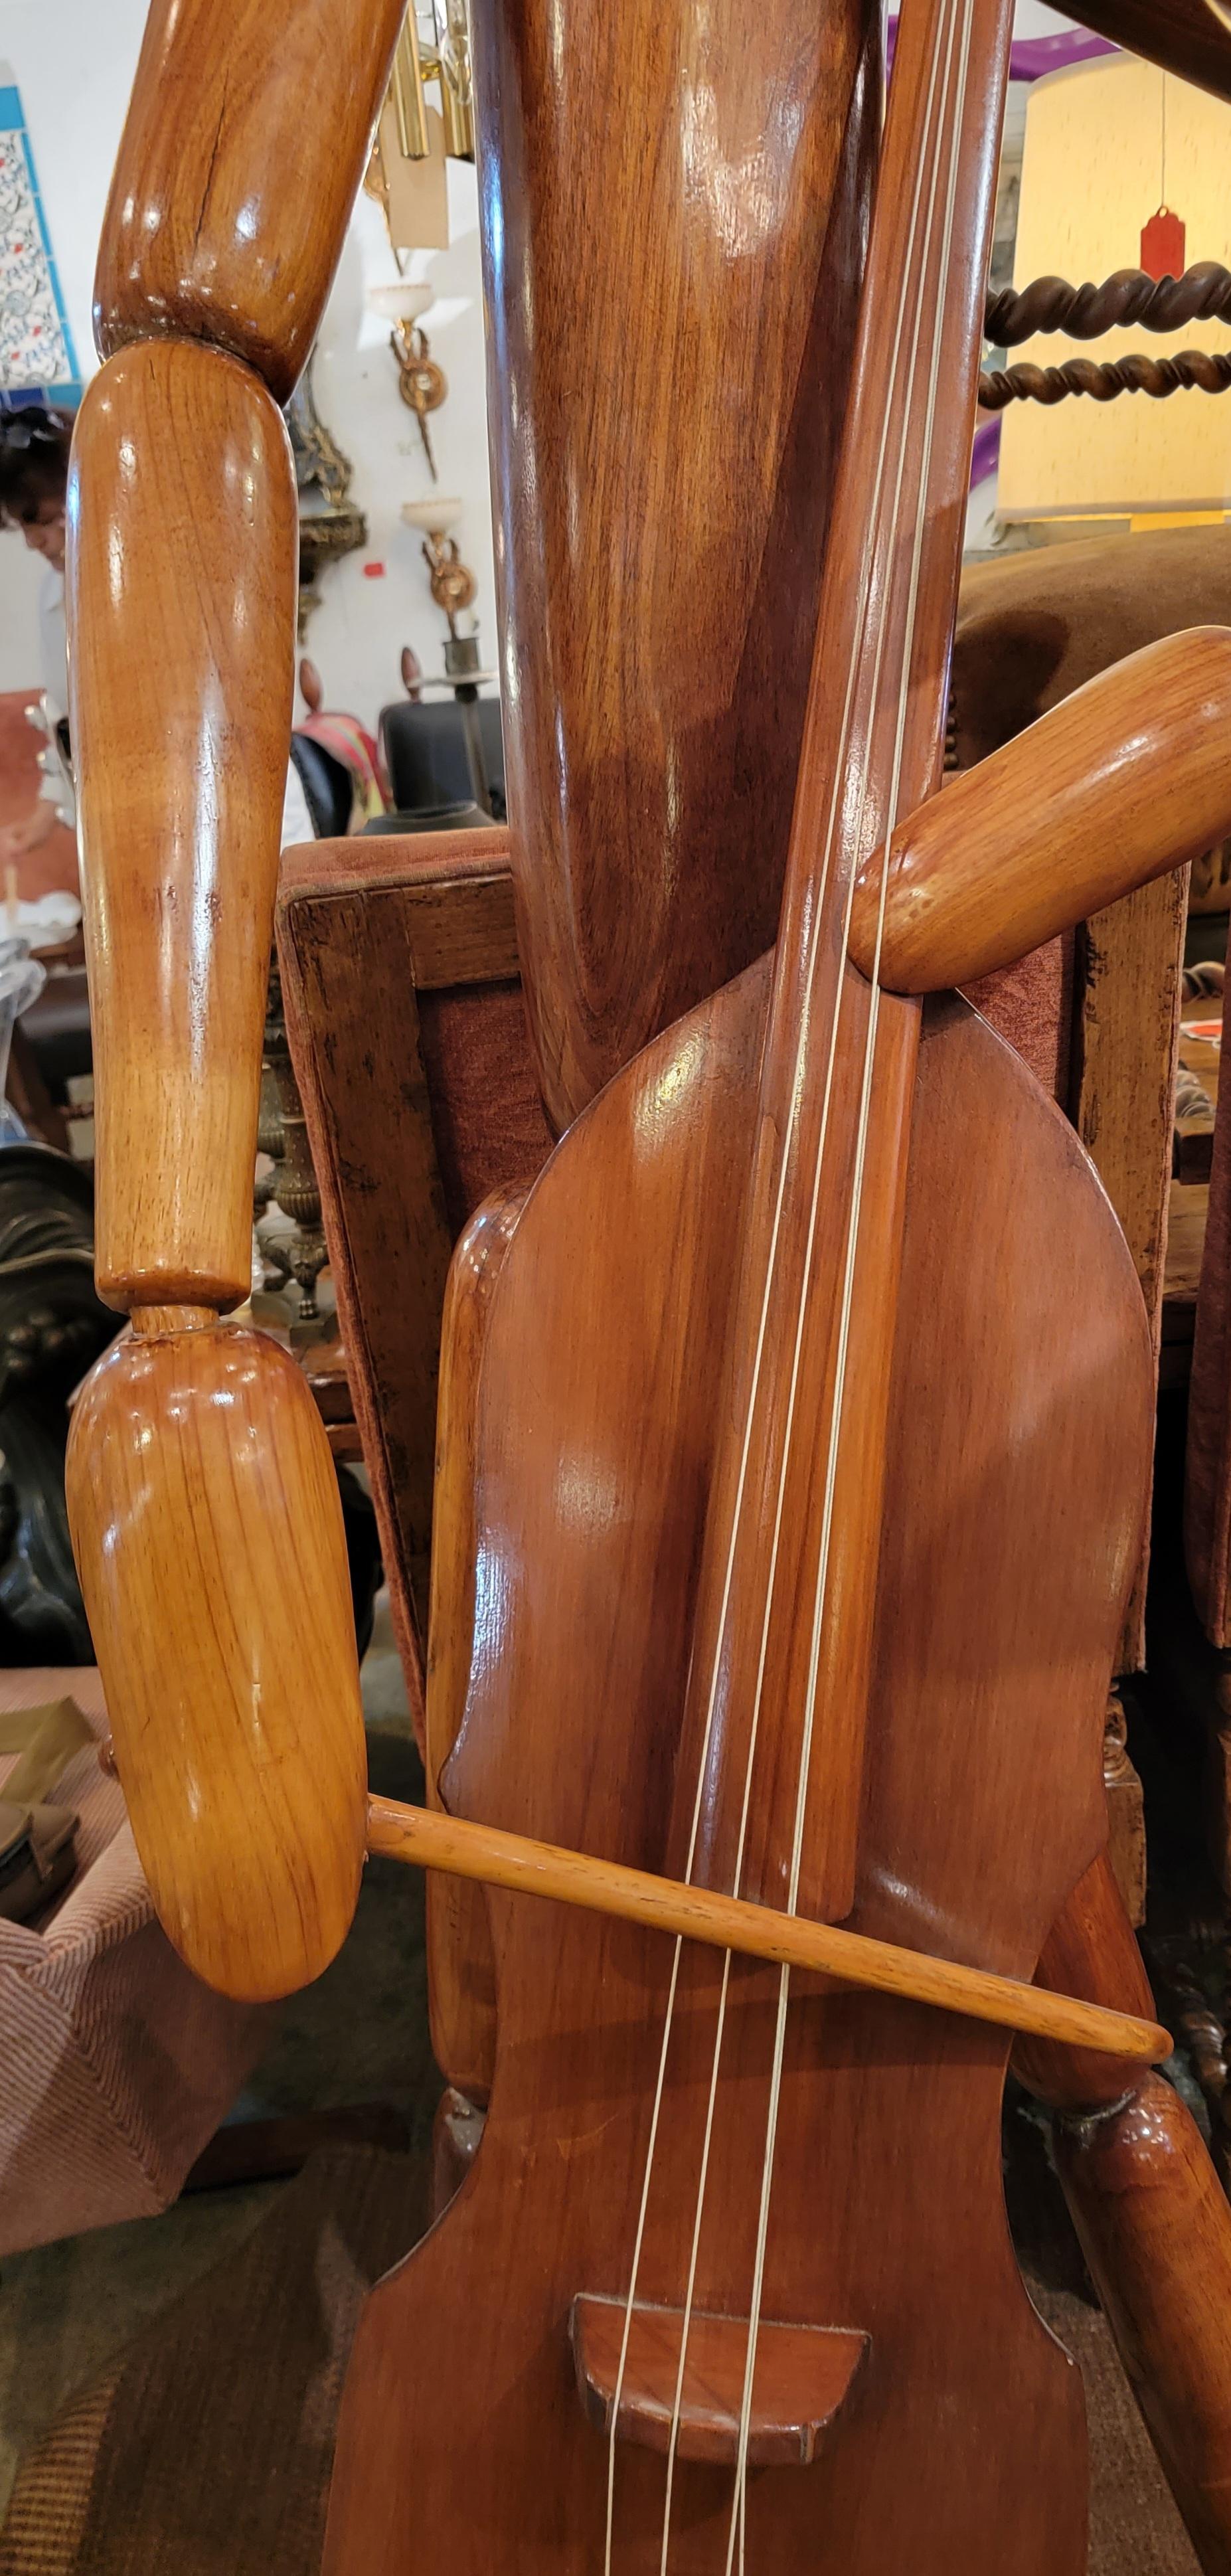 Pair of life sized carved sculptures made from wood. One is playing the violin and the other is reaching for a dance partner. Great polished wooden musicians.
 Larger sculpture measures - 77h x 30w x 20d

Smaller sculpture measures - 67h x  25w  36d